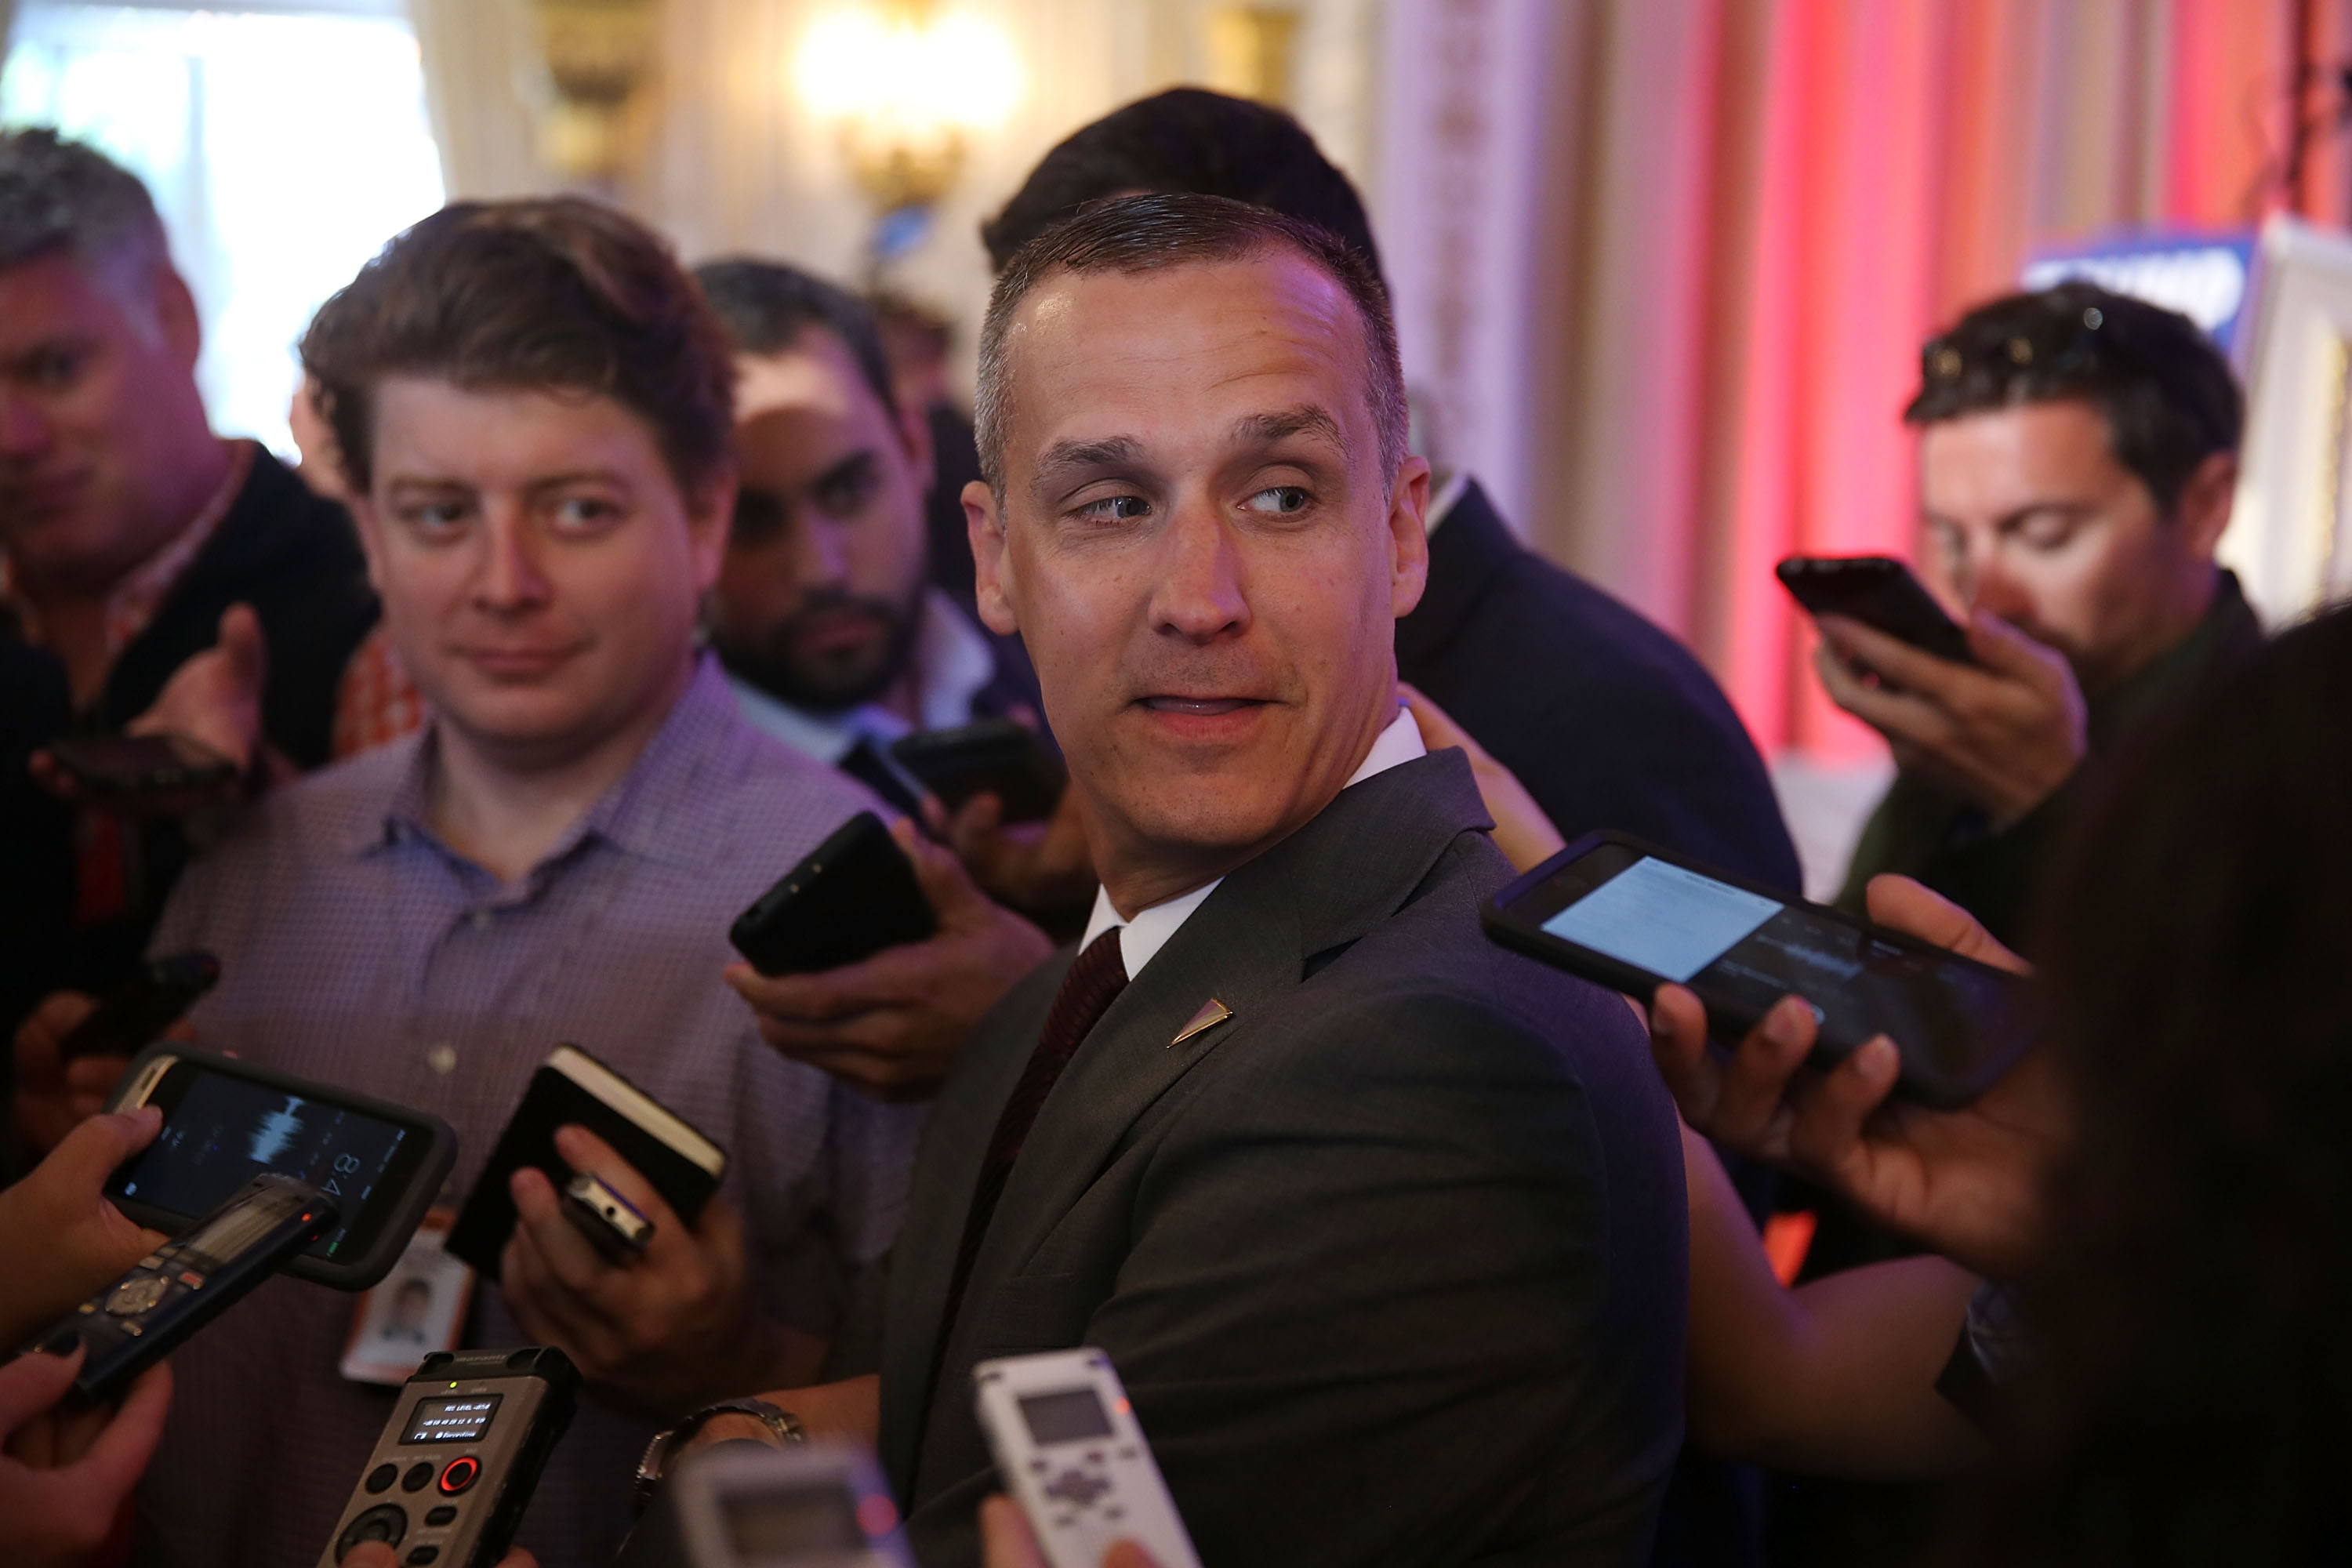 Corey Lewandowski, who manages the Donald Trump campaign, was charged with battery today.